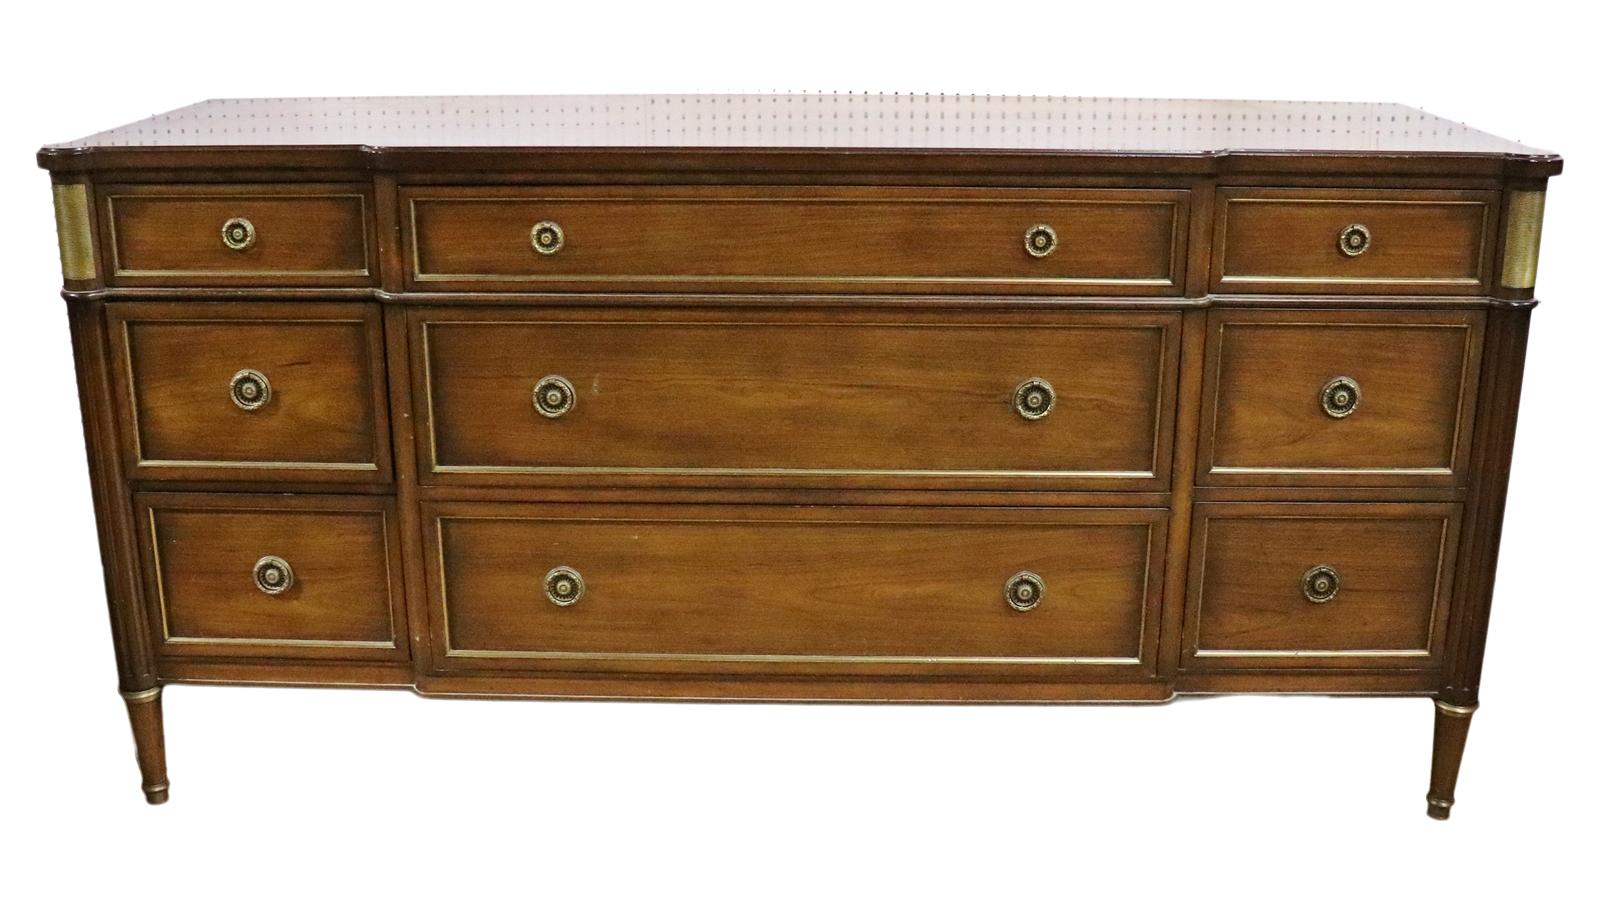 Attributed to Maison Jansen. Brass accents. Brass hardware. 9 Dovetail drawers. Measures: 35